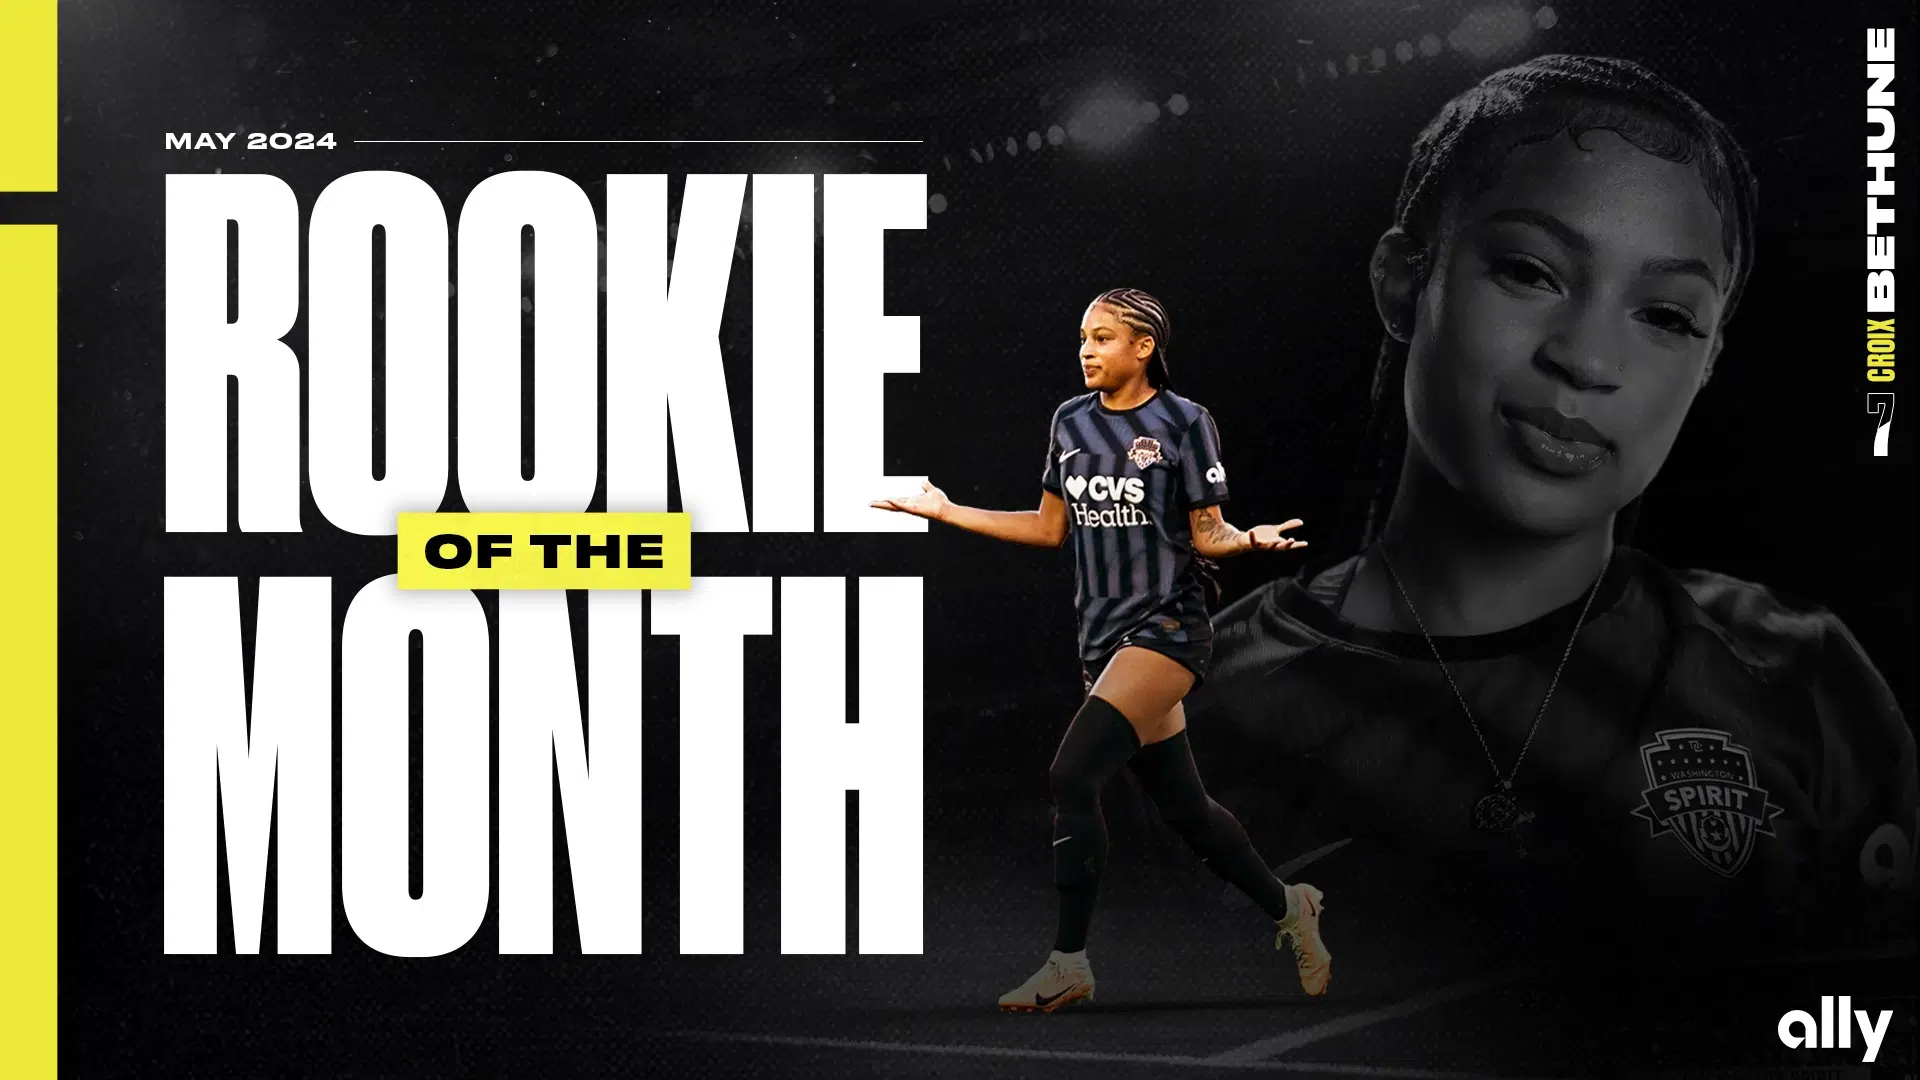 Croix Bethune: Rookie of the Month for May.